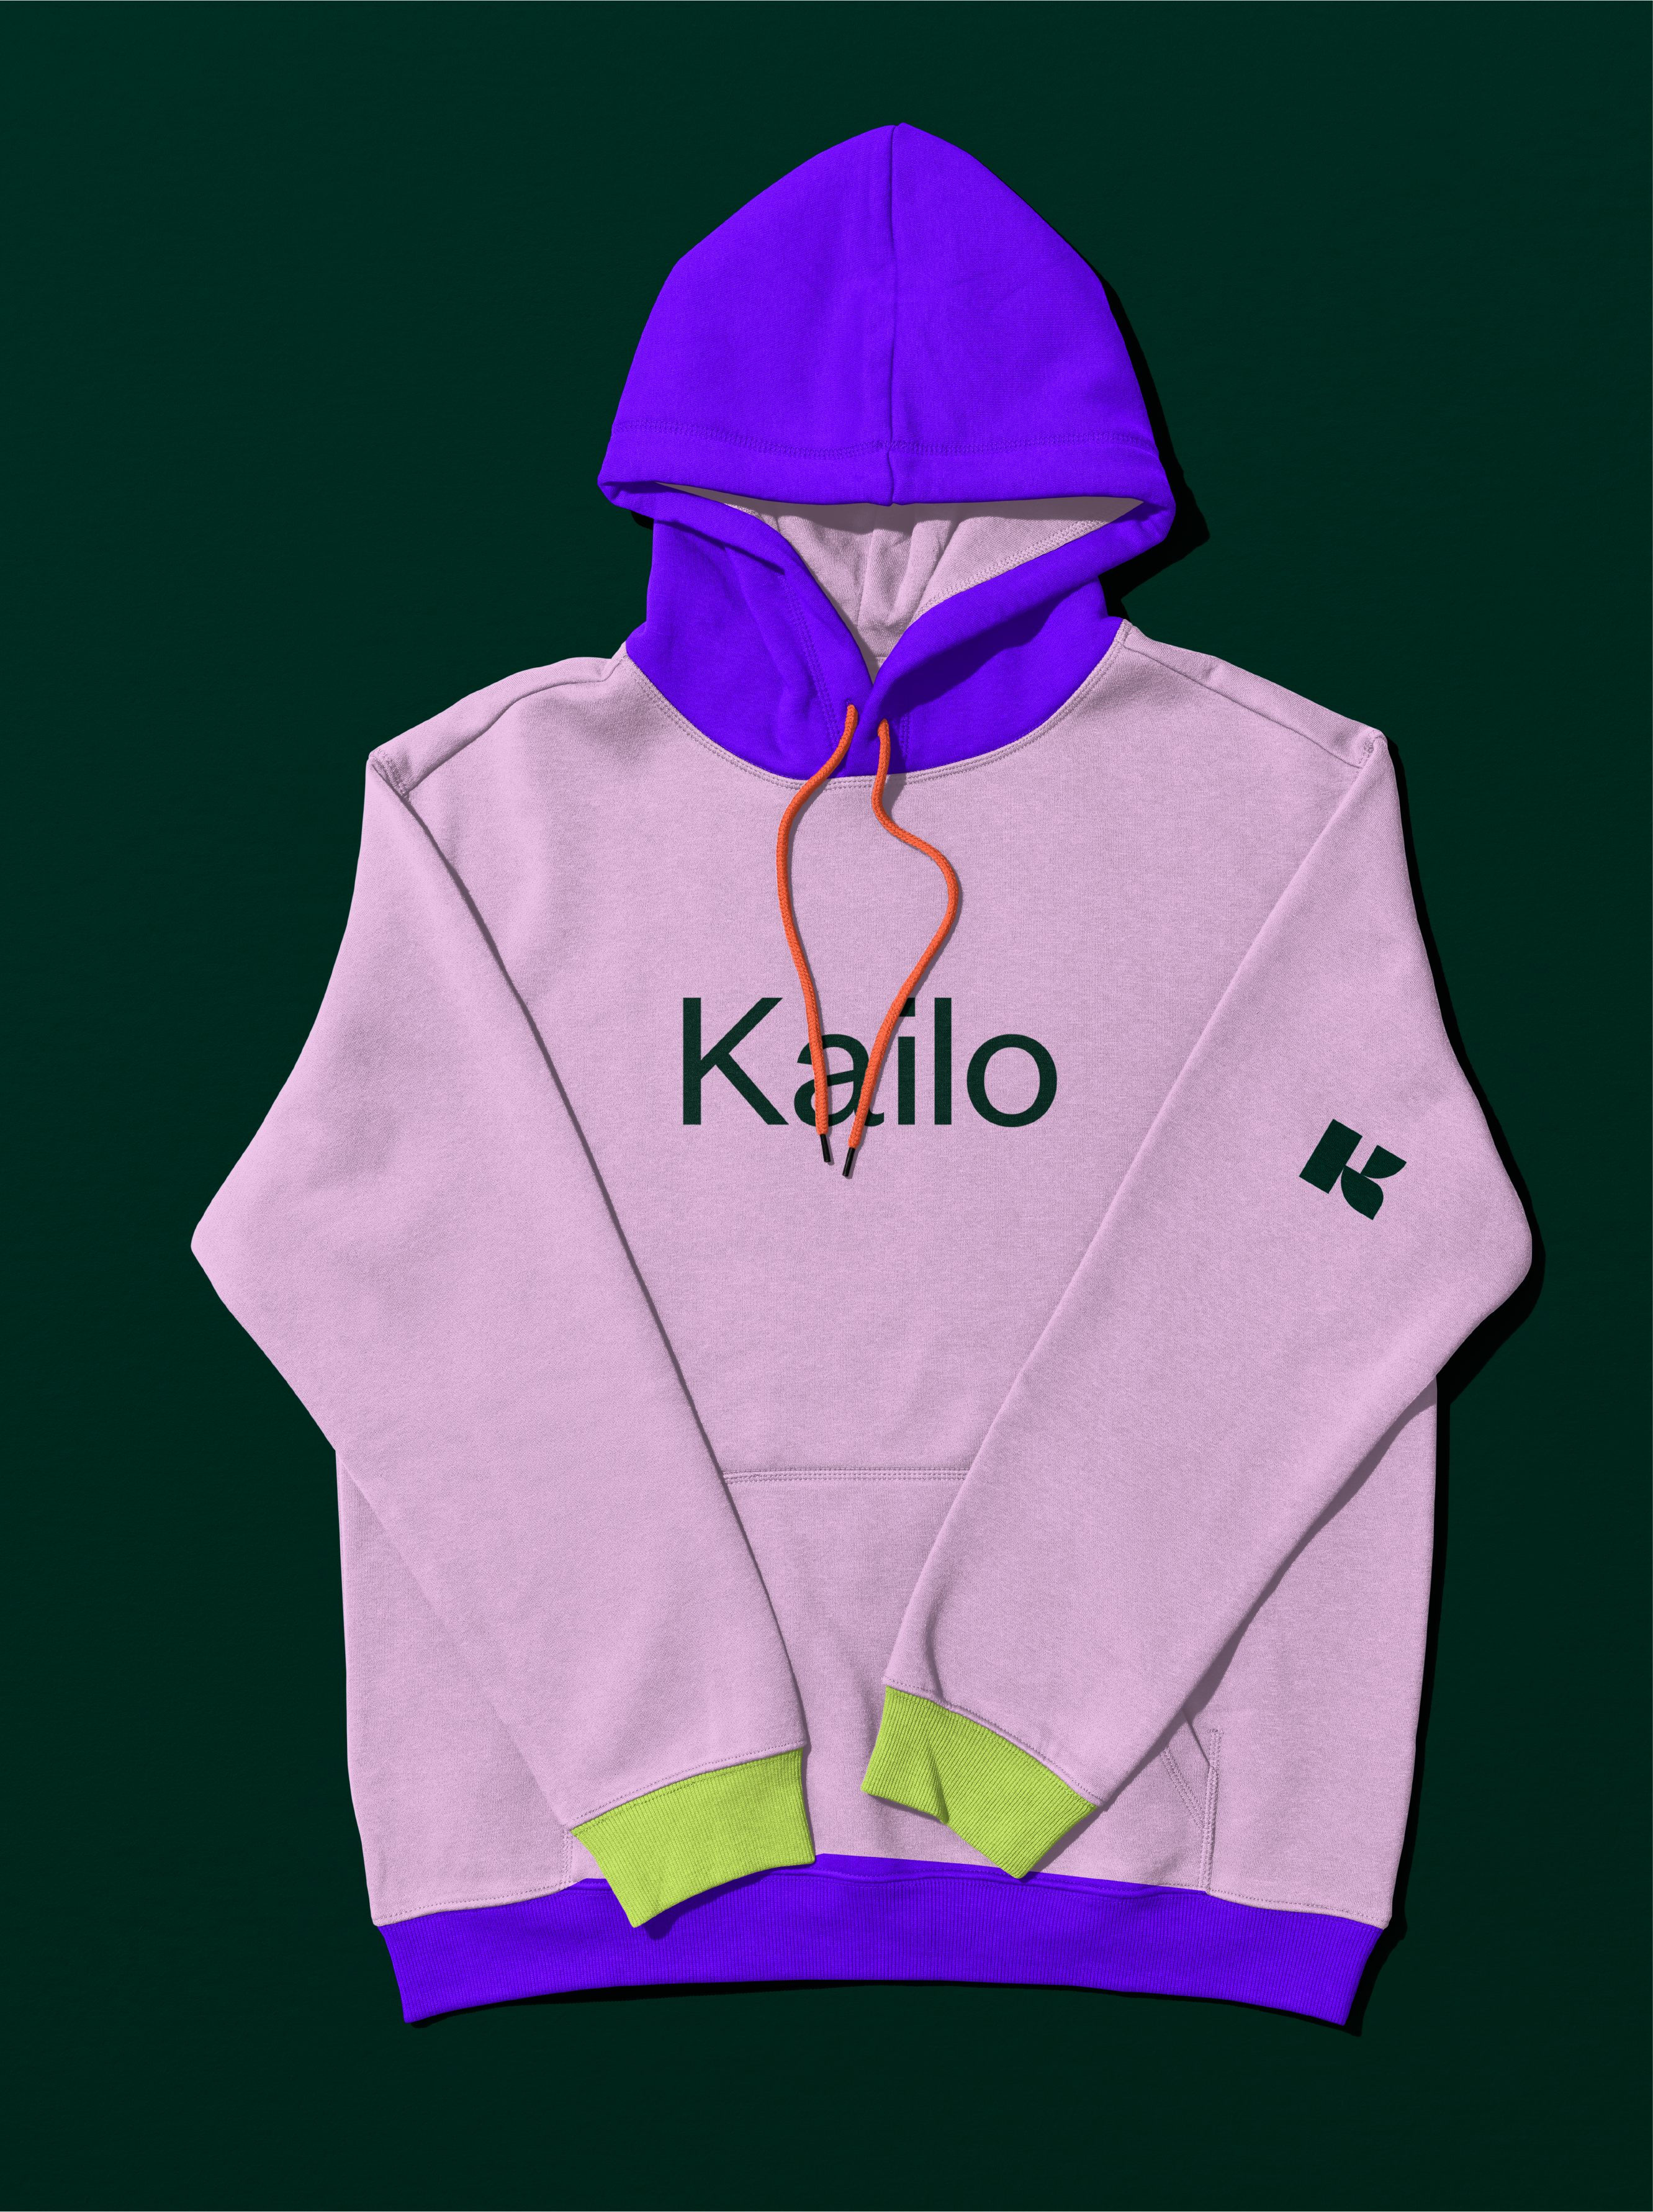 FHD-01-_Website_Projects_kailo-06